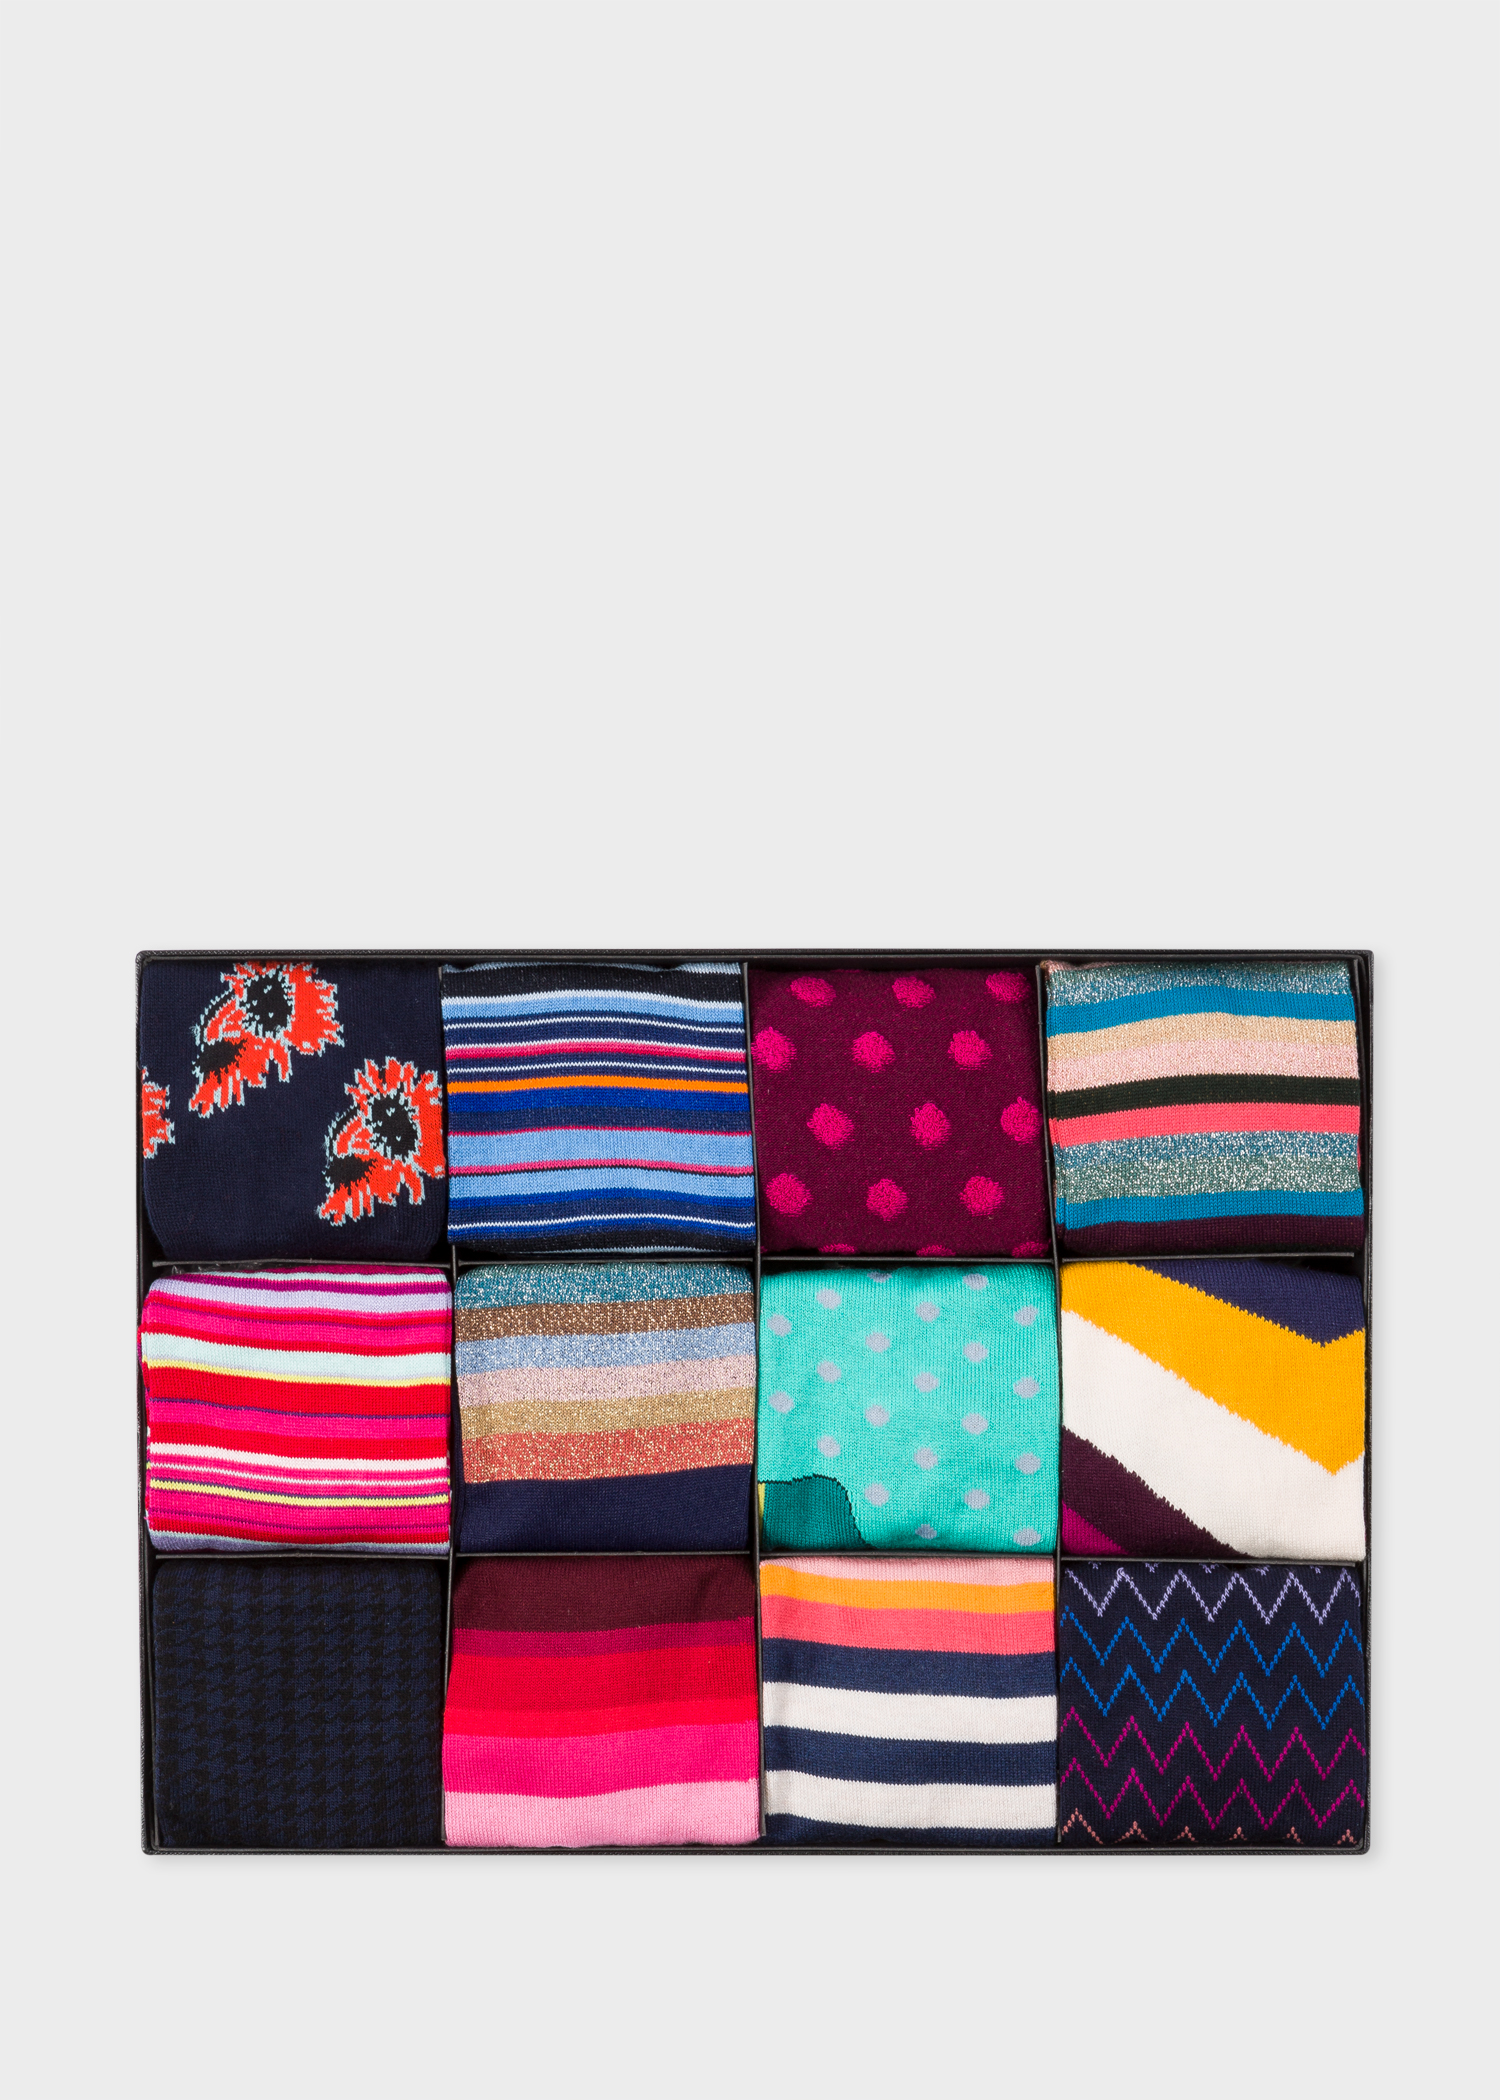 Top down view - Paul Smith Women's Socks Gift Box 2nd Edition